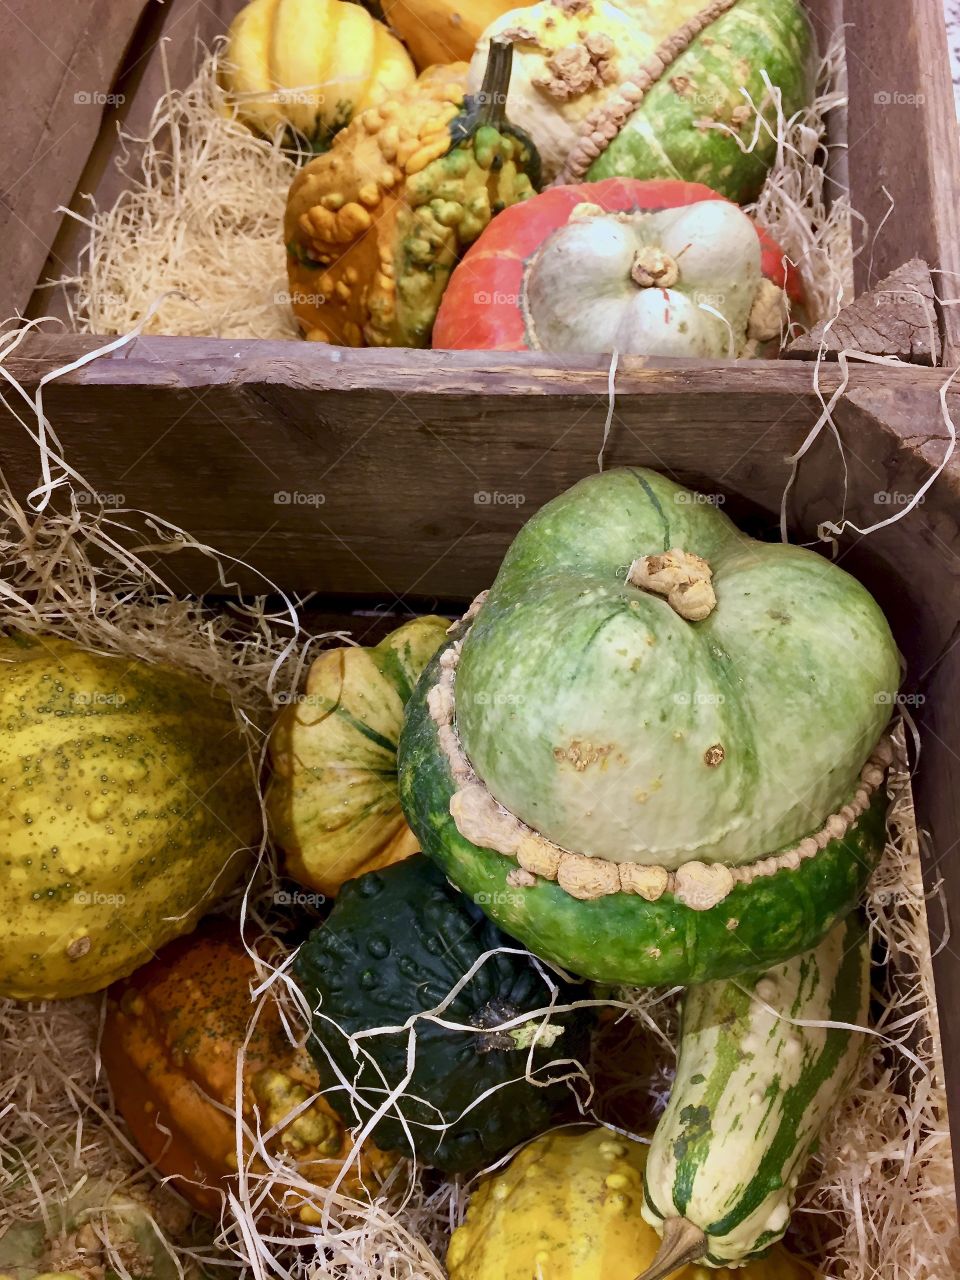 Wooden box with colorful pumpkins